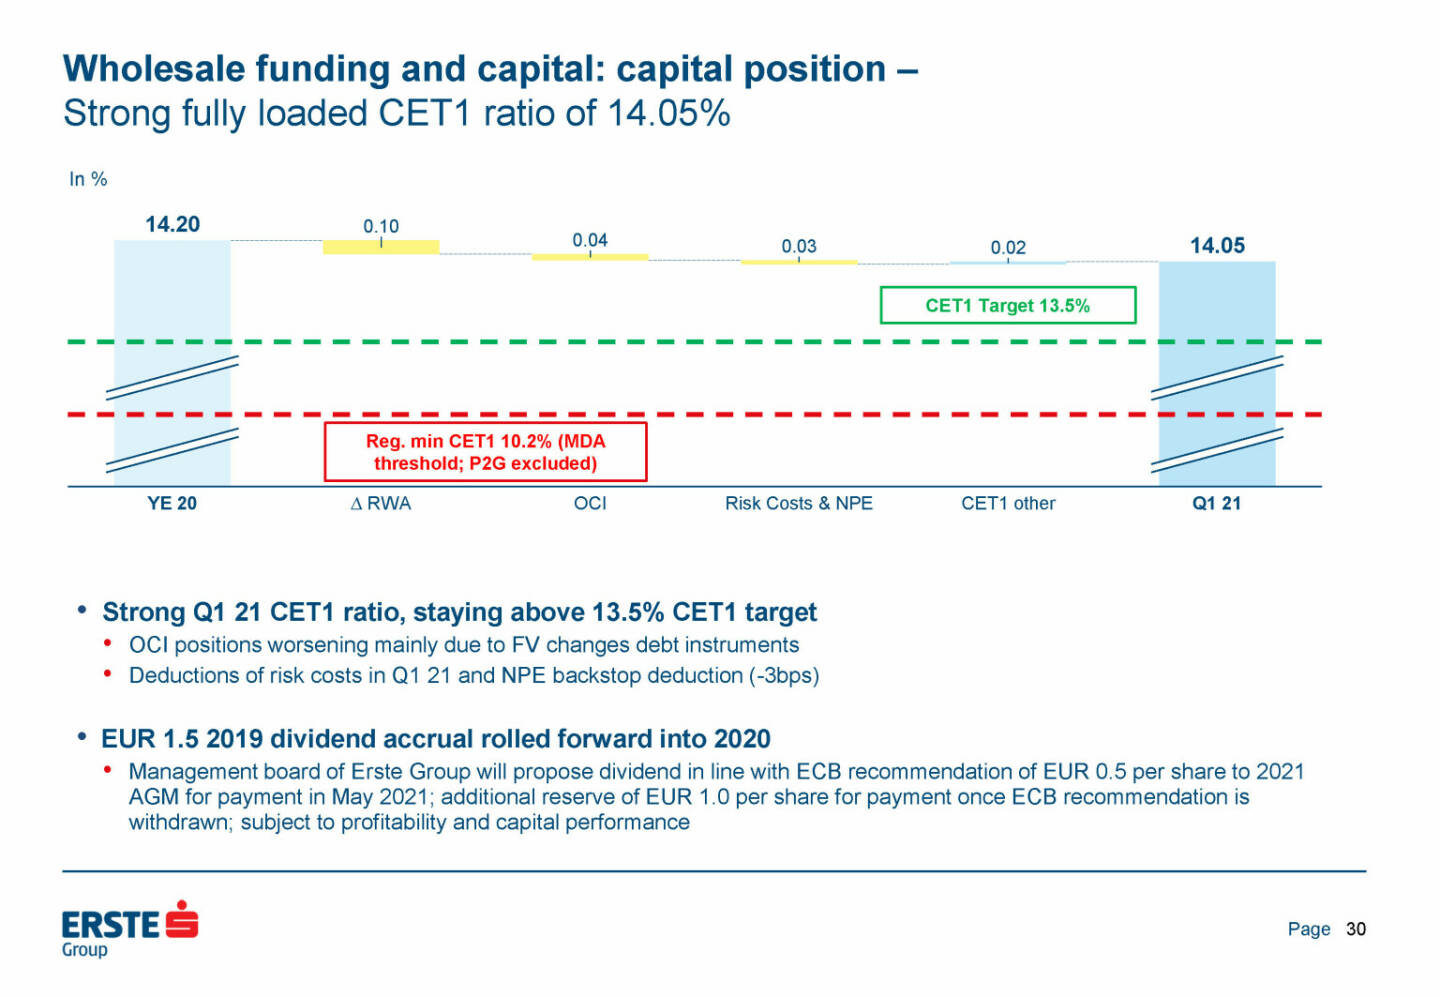 Erste Group - Wholesale funding and capital: capital position